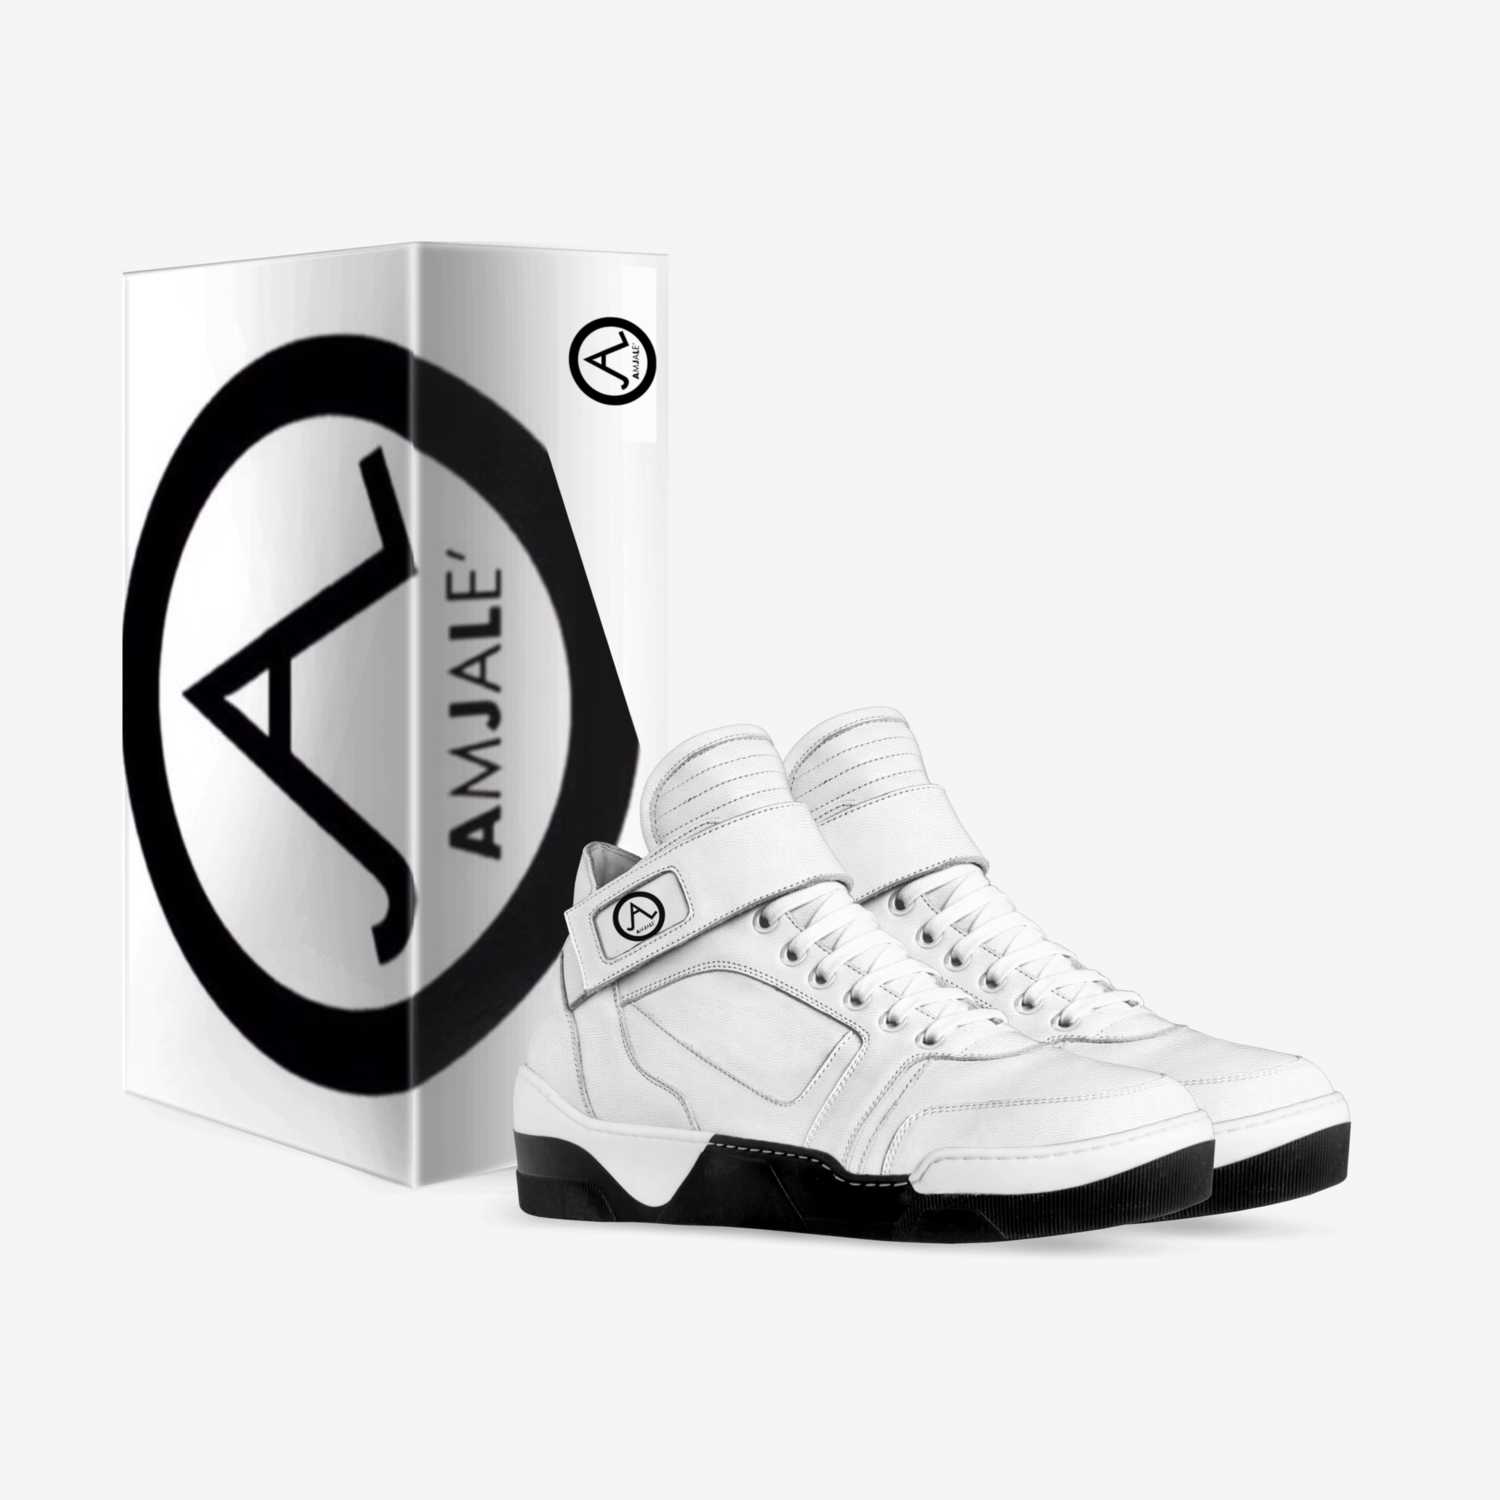 AmJaLe’ custom made in Italy shoes by Amjale’ | Box view